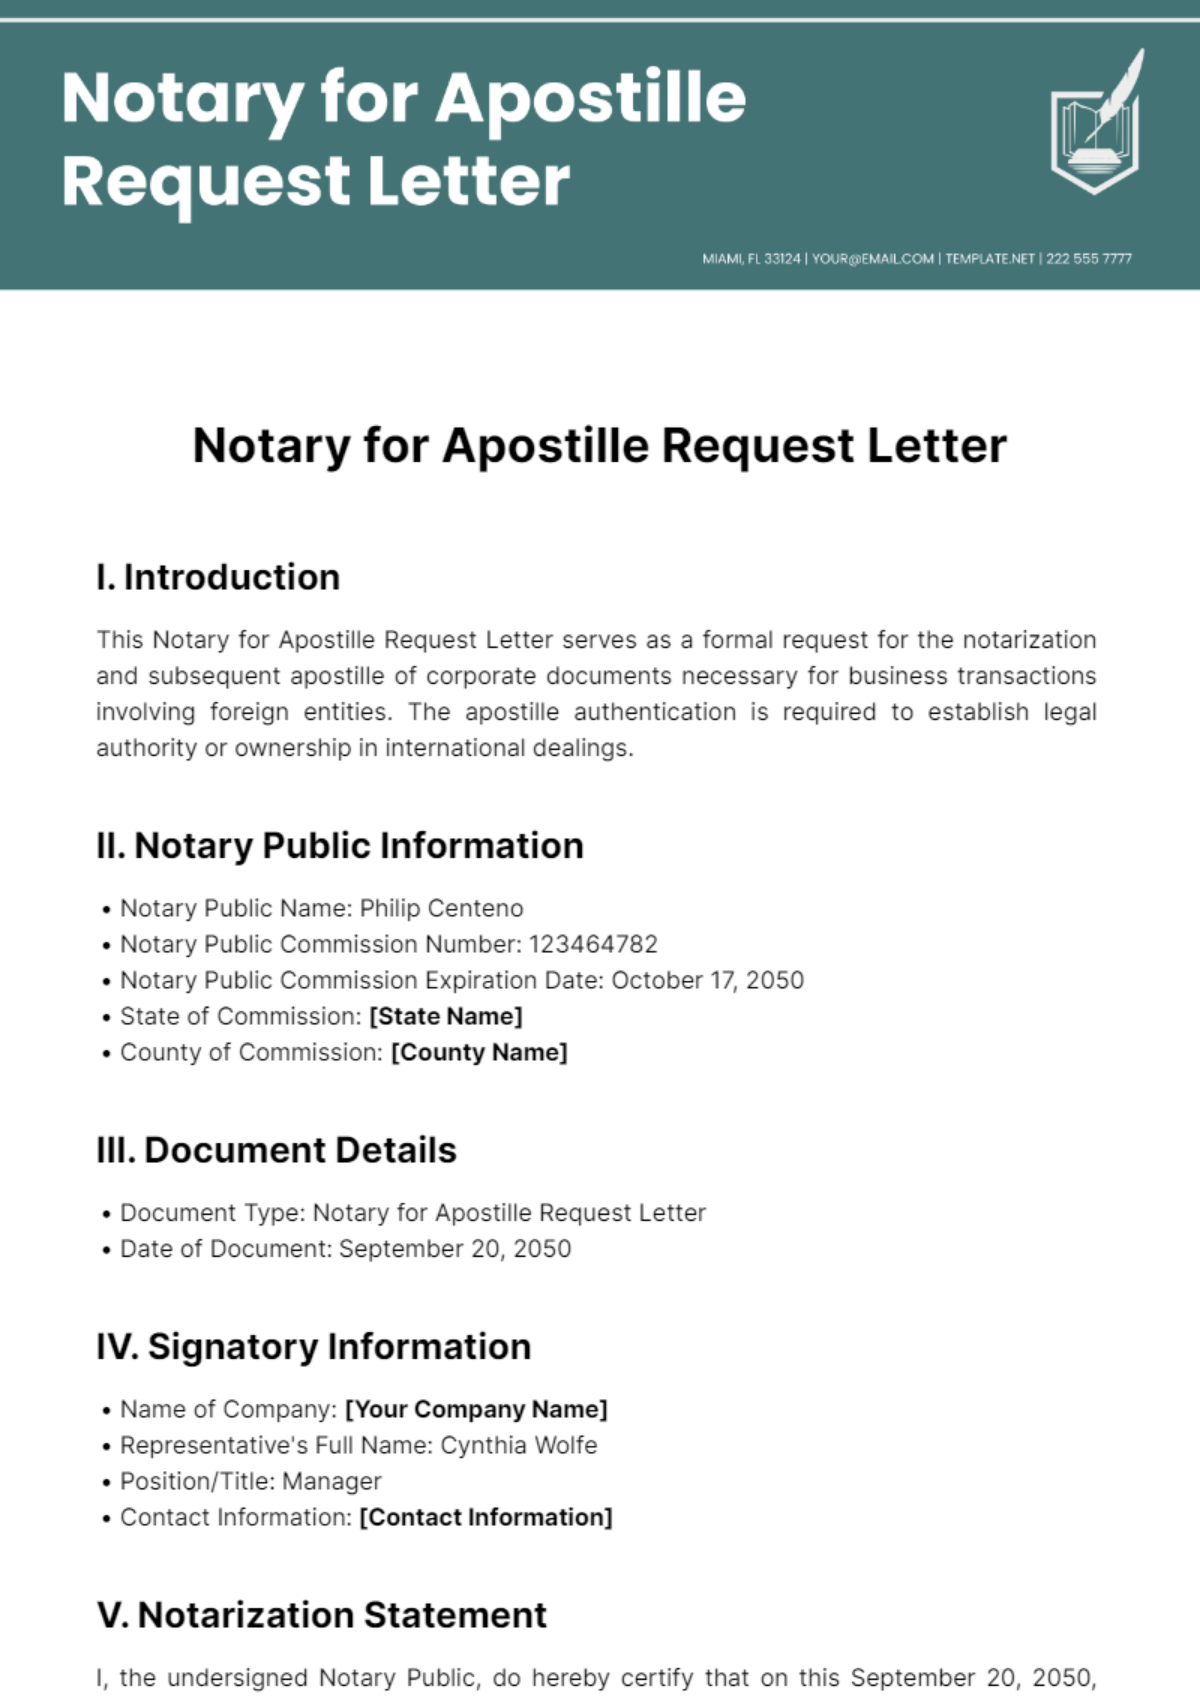 Notary for Apostille Request Letter Template